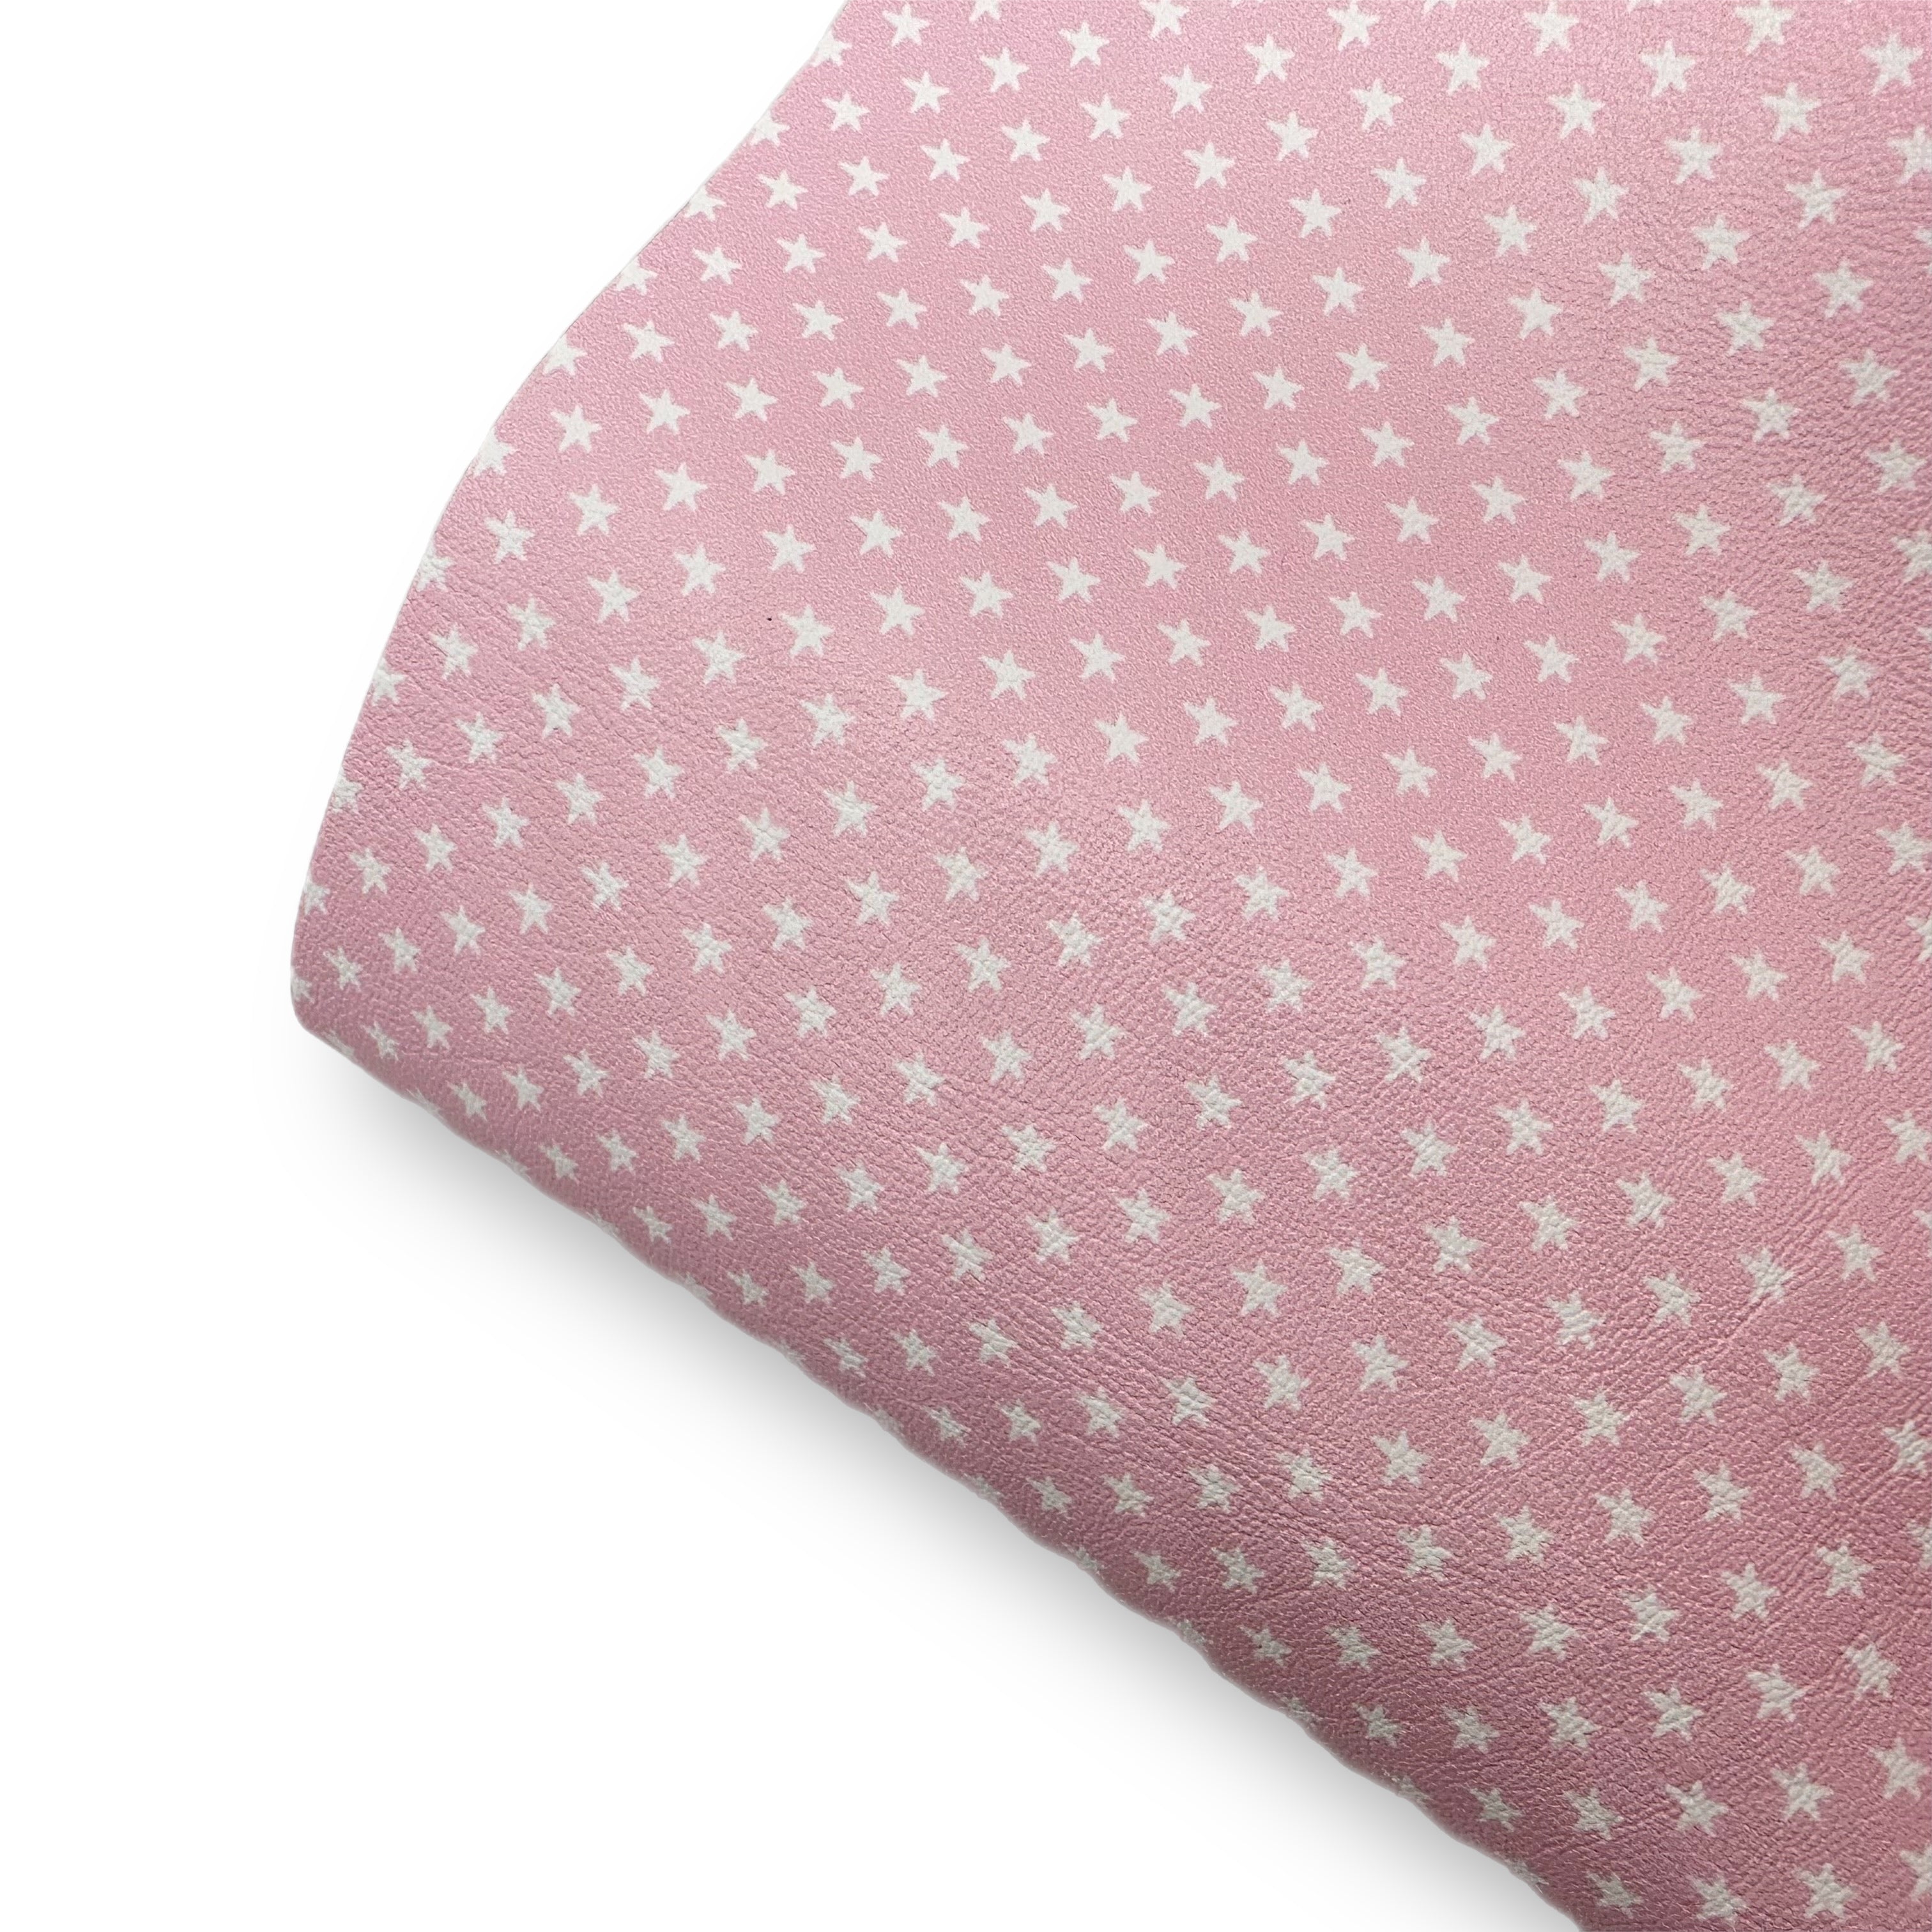 Soft Pink Stars Premium Faux Leather Fabric Sheets